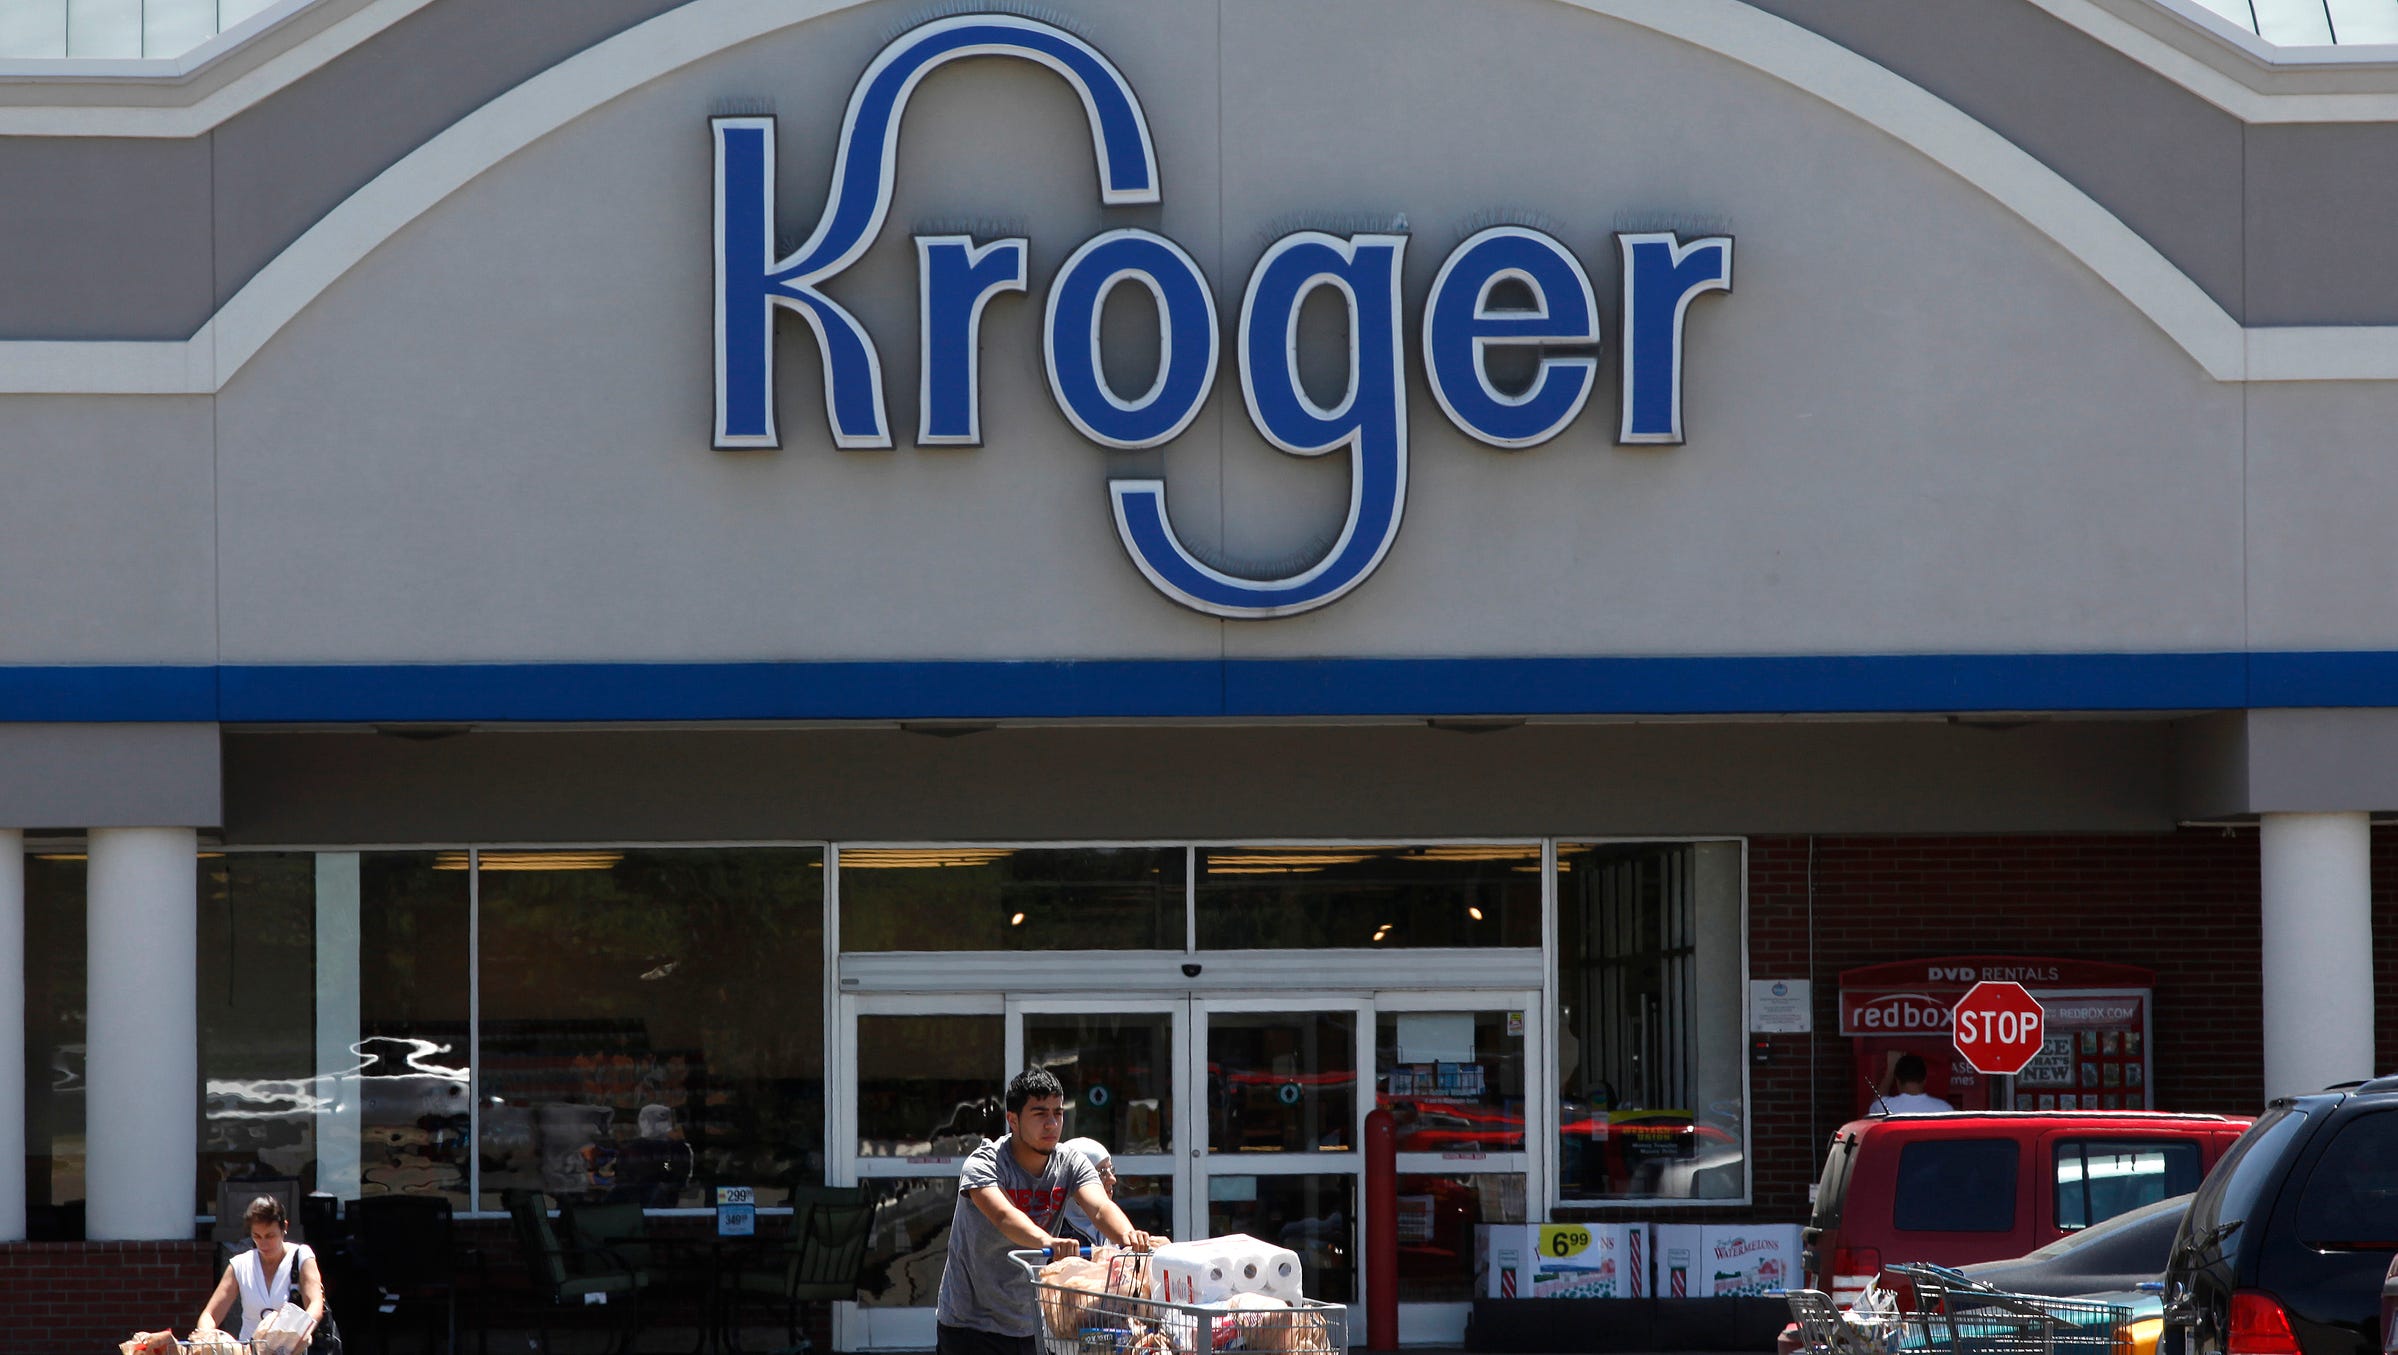 Kroger offers free pharmacy delivery service in Michigan